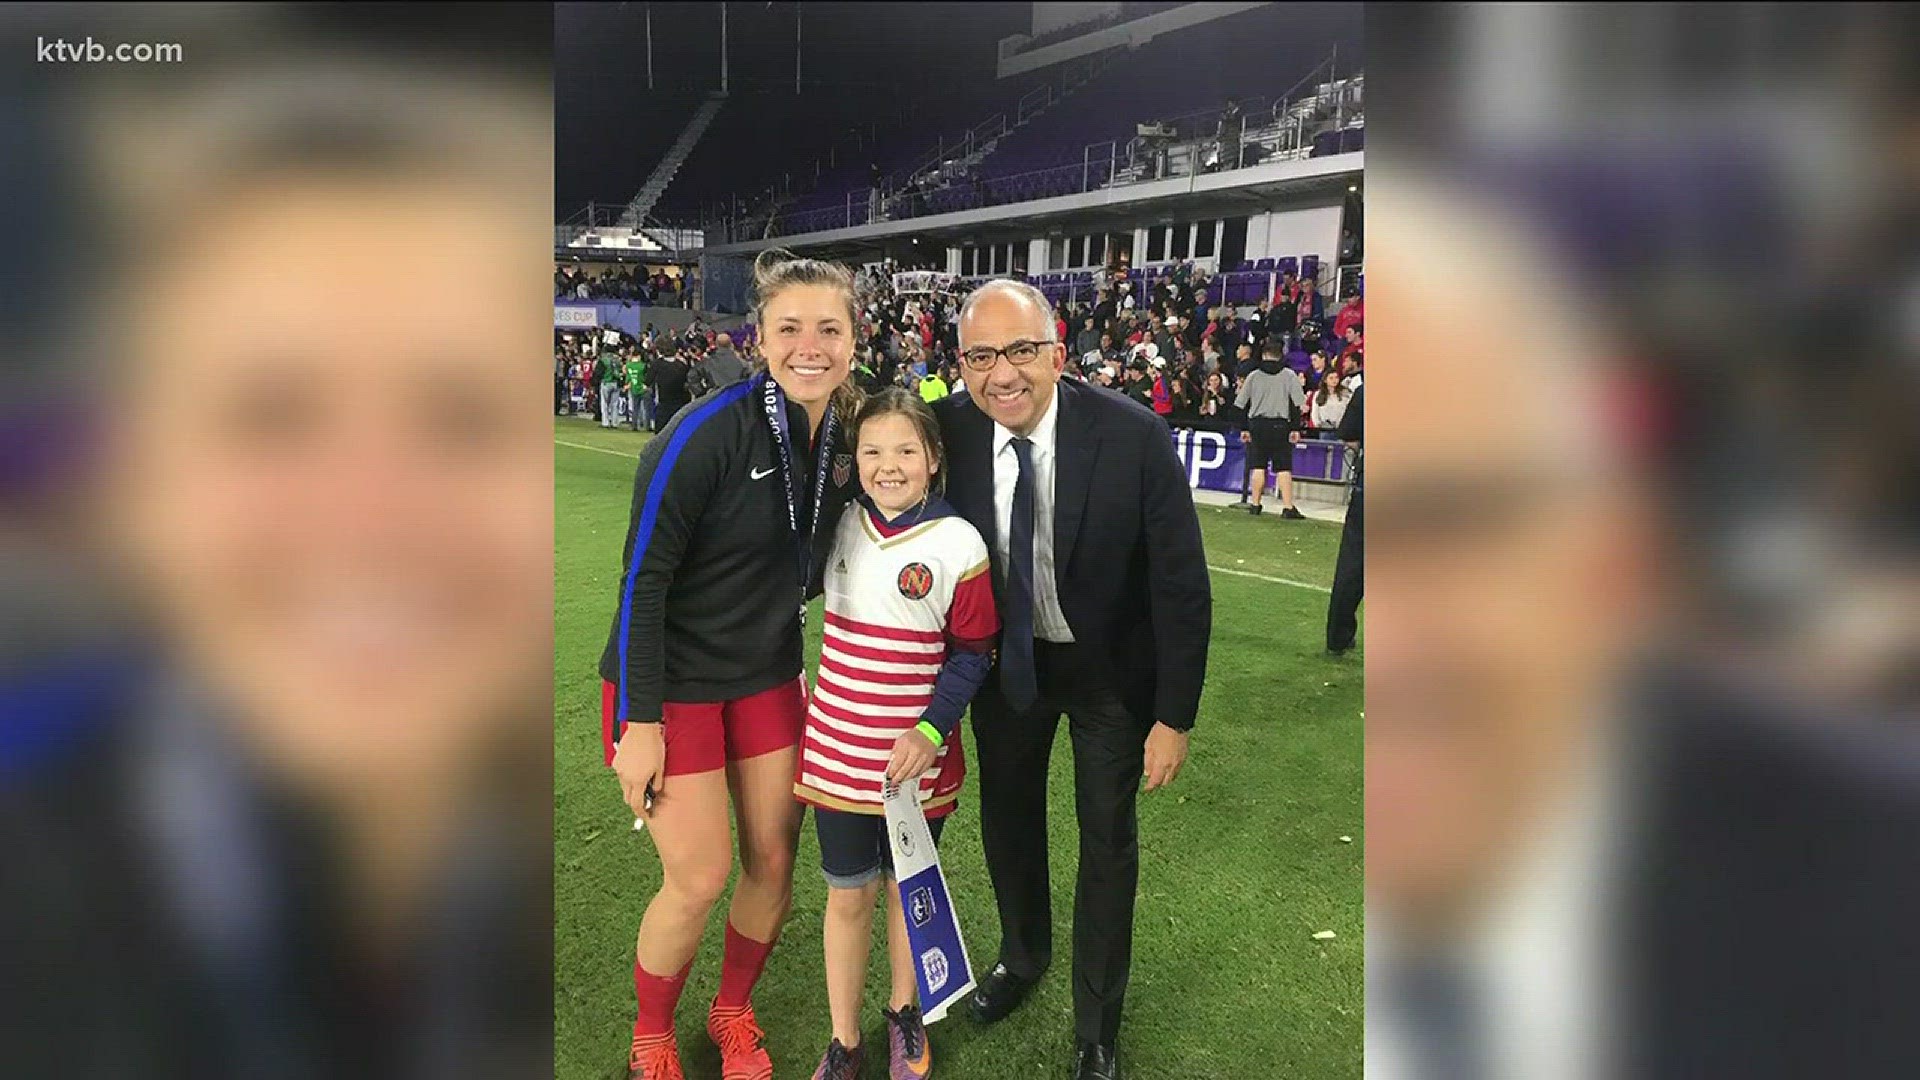 8-year-old Olivia Wade, from Boise, got the experience of a lifetime at the US National Women's Soccer Team Game in Orlando when she got to meet Boise native Sofia Huerta.